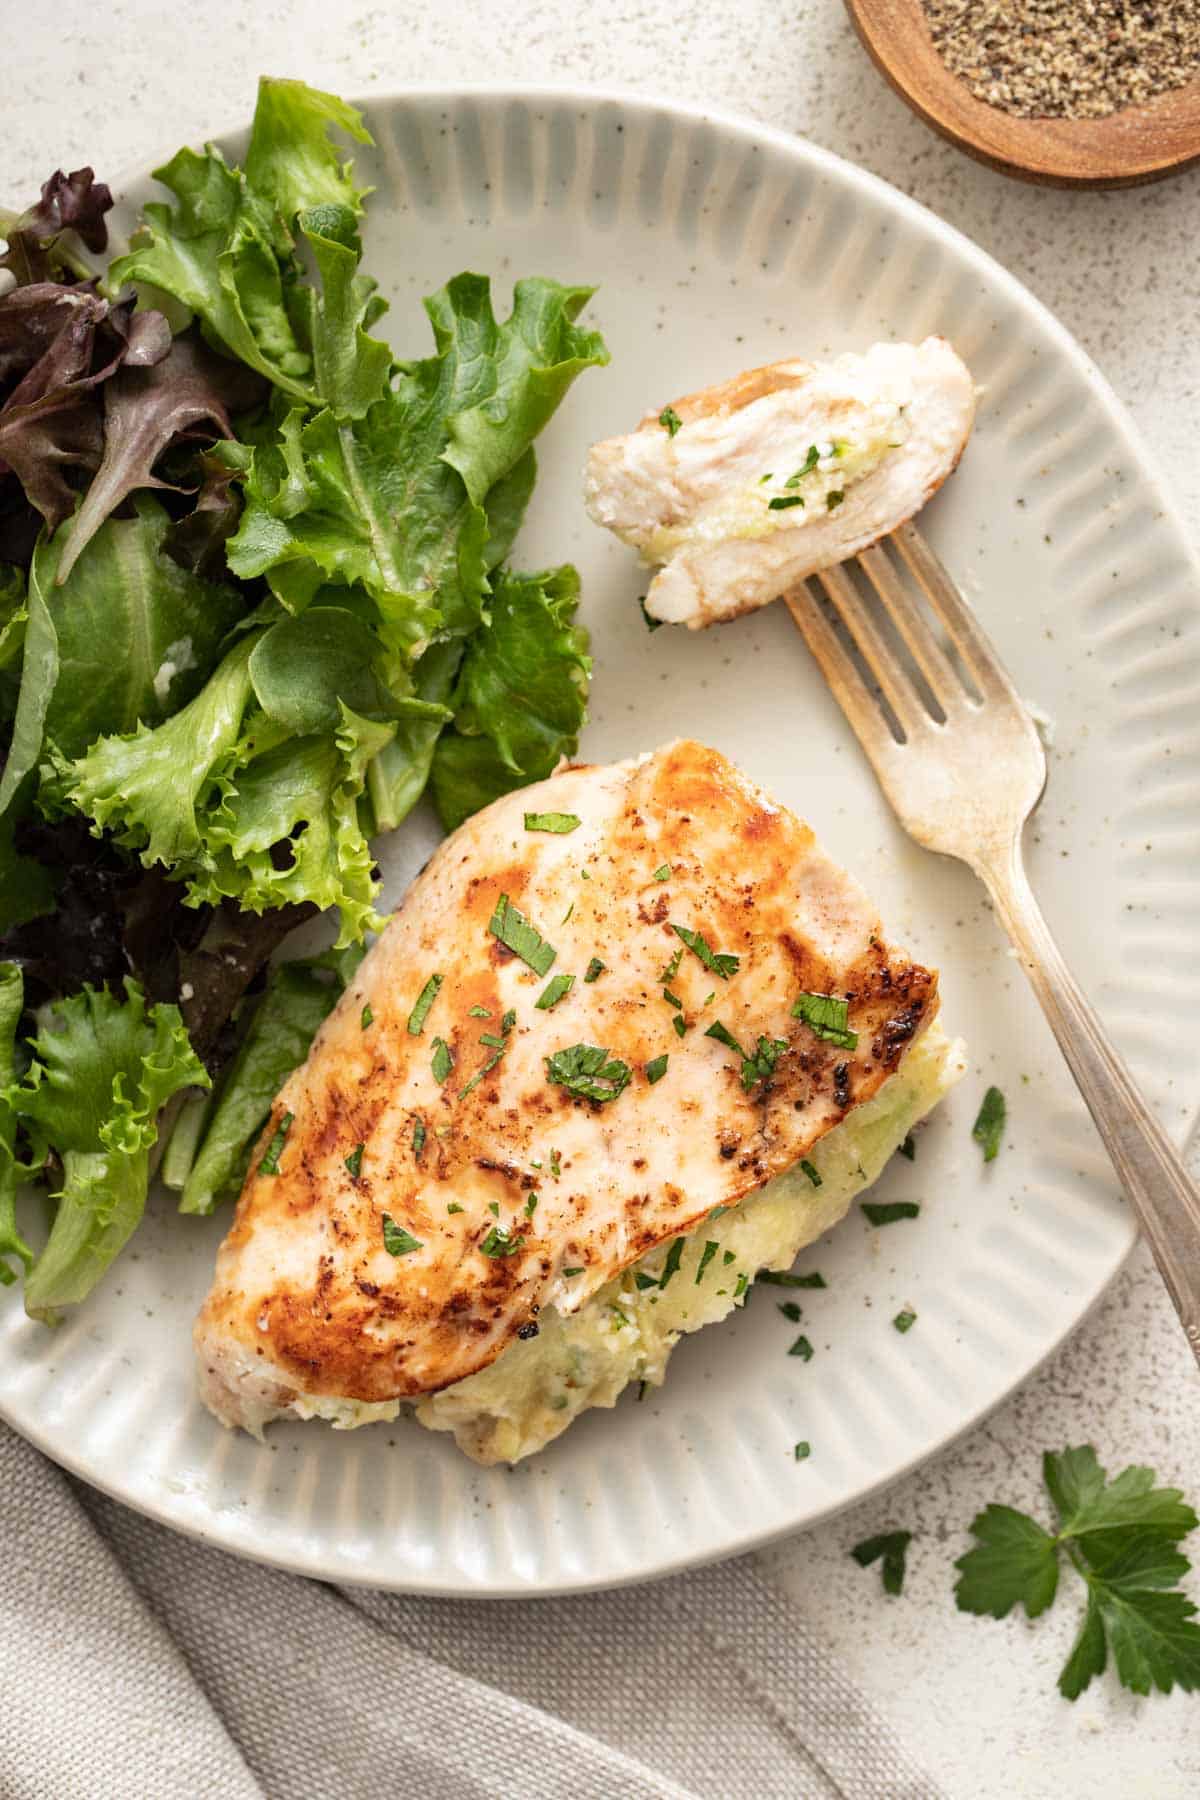 A sliced stuffed chicken with a fork, next to mixed greens.